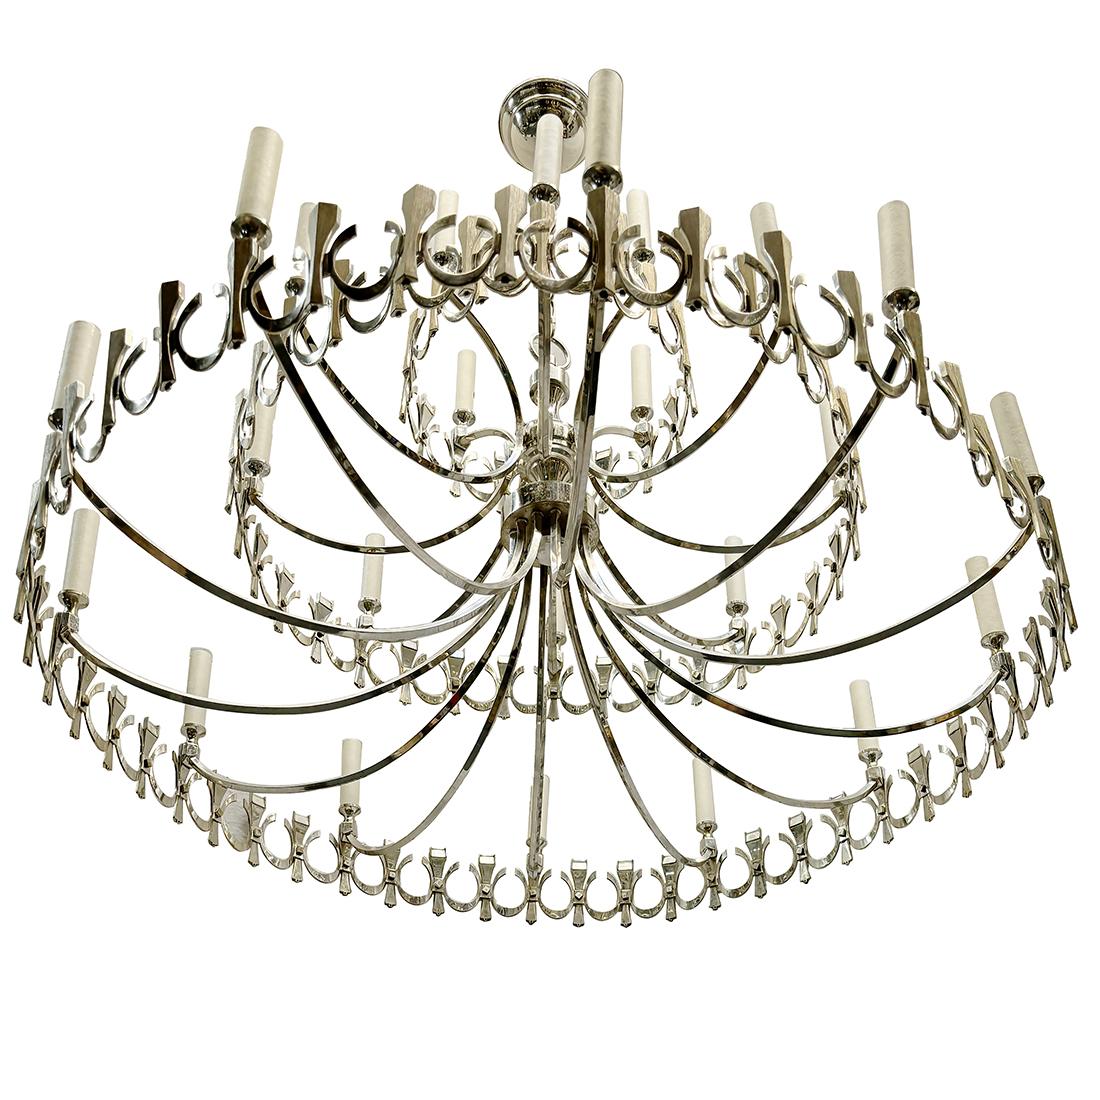 A circa 1960's Italian midcentury chandelier with 24 light in 2 levels. Silver and gilt finish.

Measurements:
Height: 37”
Diameter: 38”